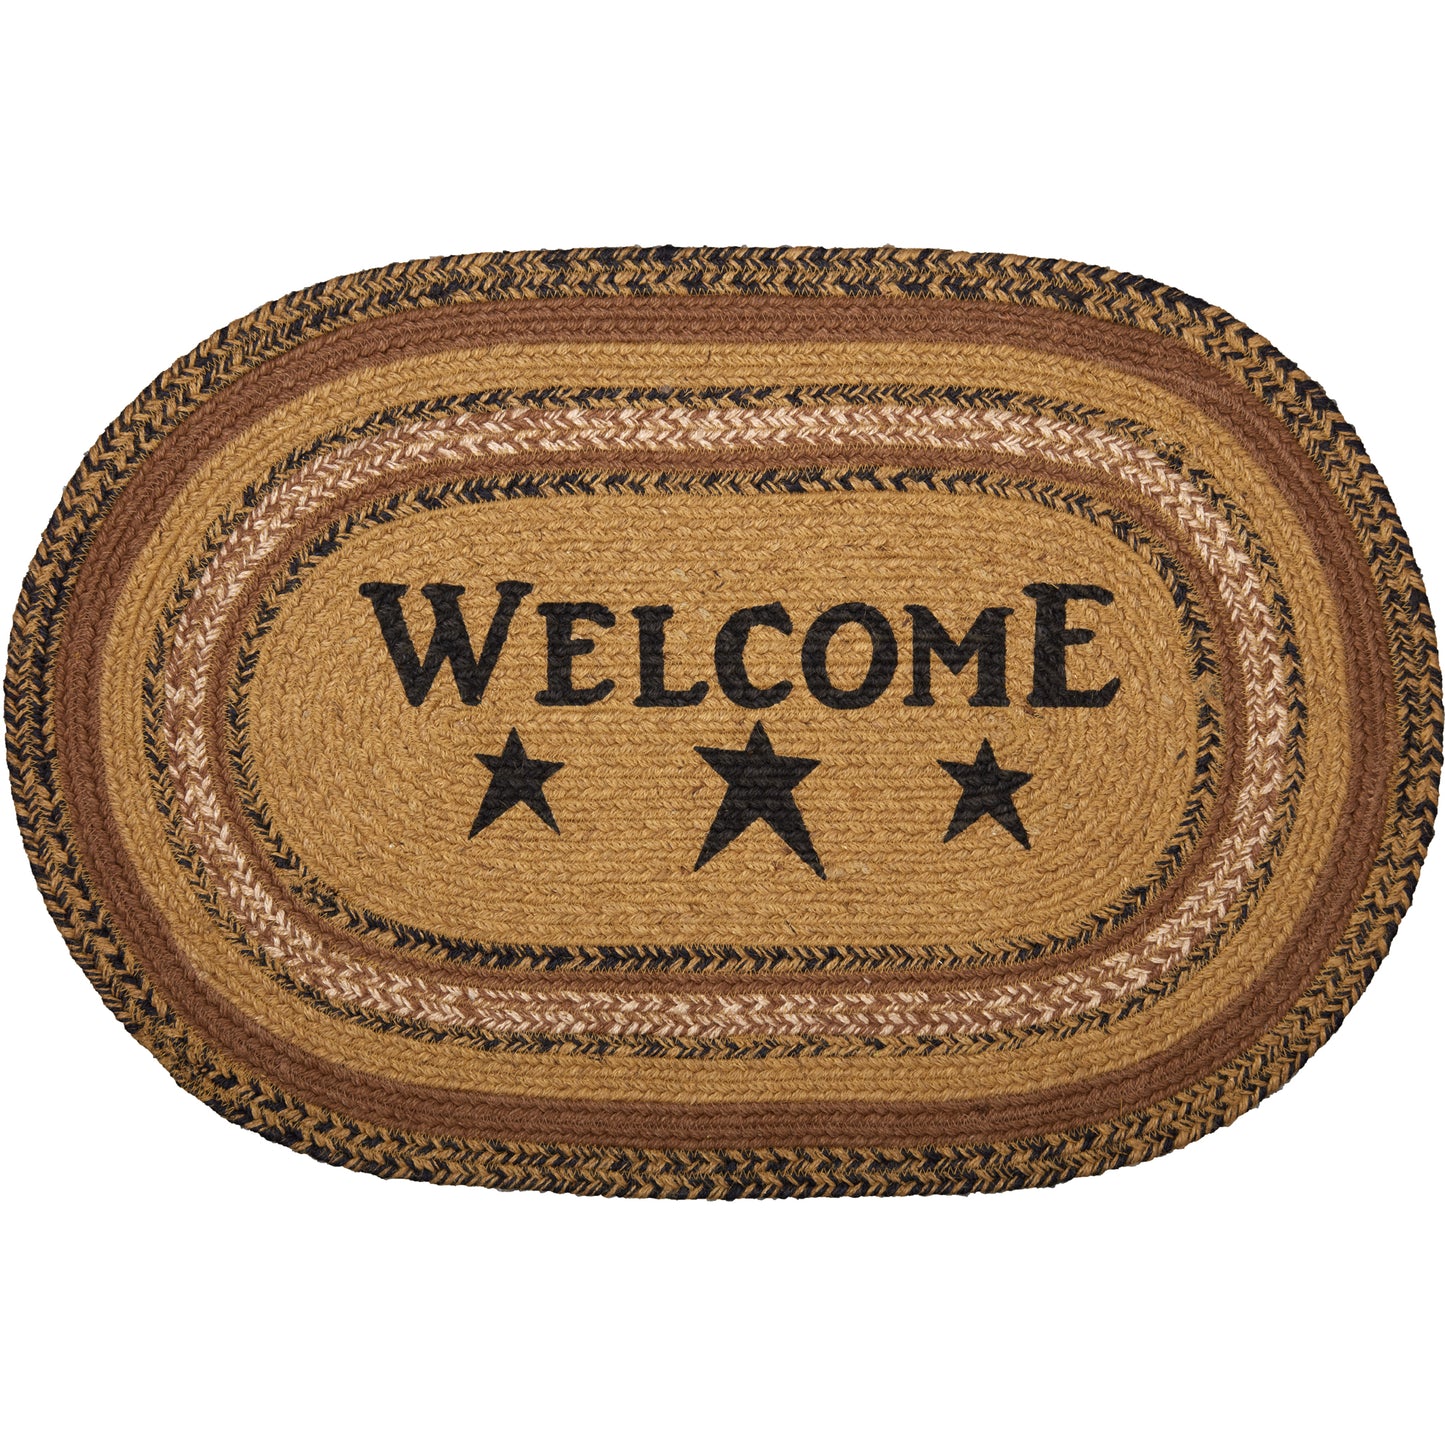 69792-Kettle-Grove-Jute-Rug-Oval-Stencil-Welcome-w-Pad-20x30-image-1